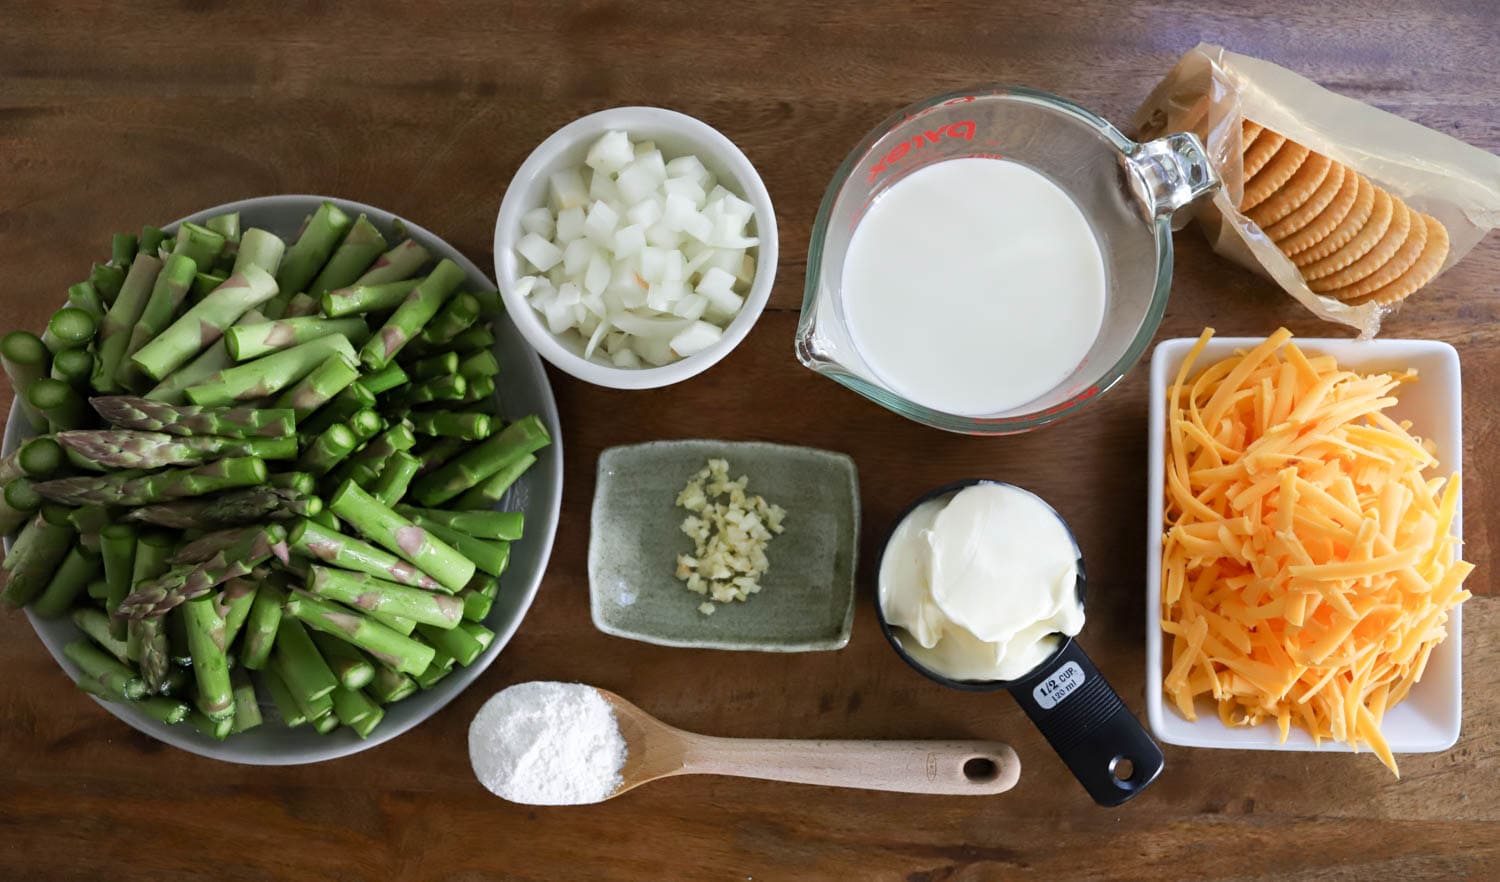 ingredients for easy asparagus casserole on wooden board.